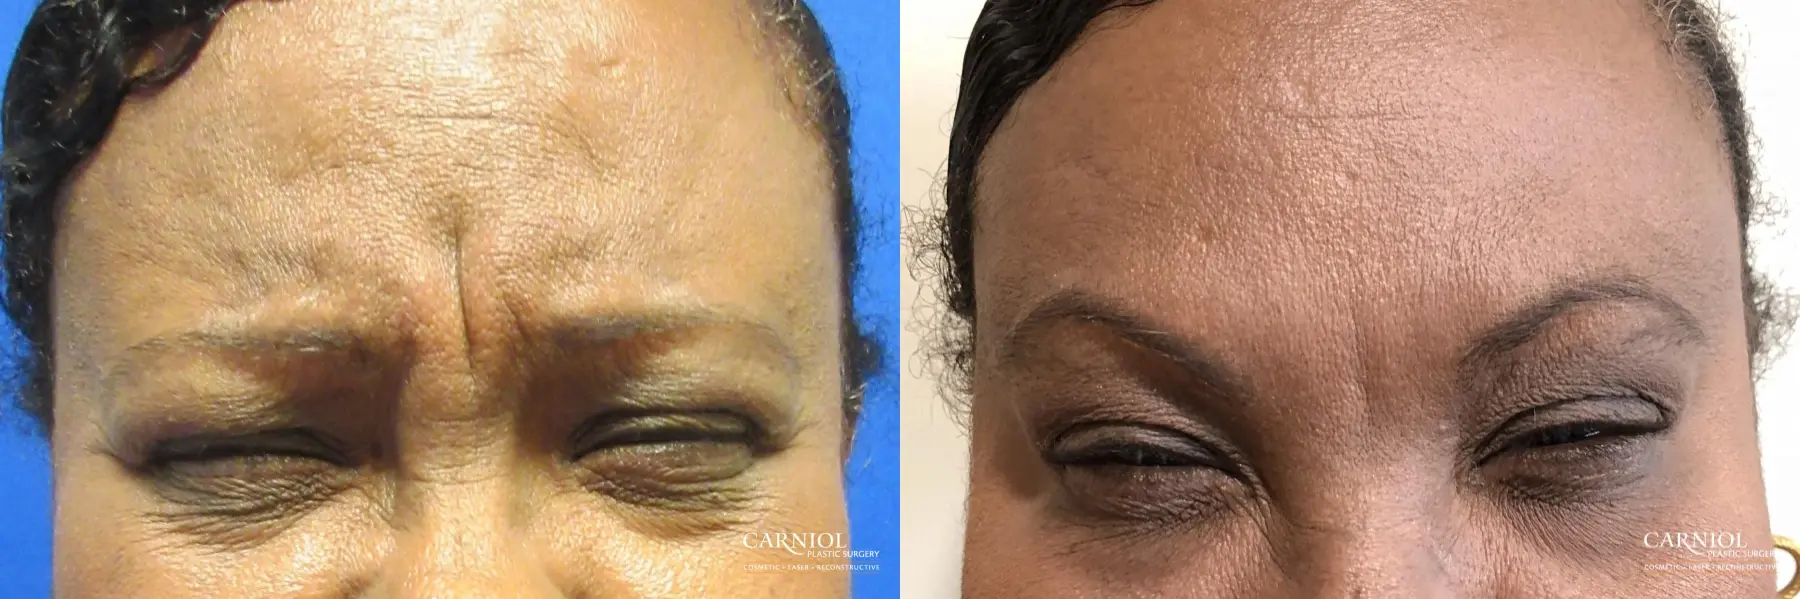 BOTOX® Cosmetic: Patient 3 - Before and After 1